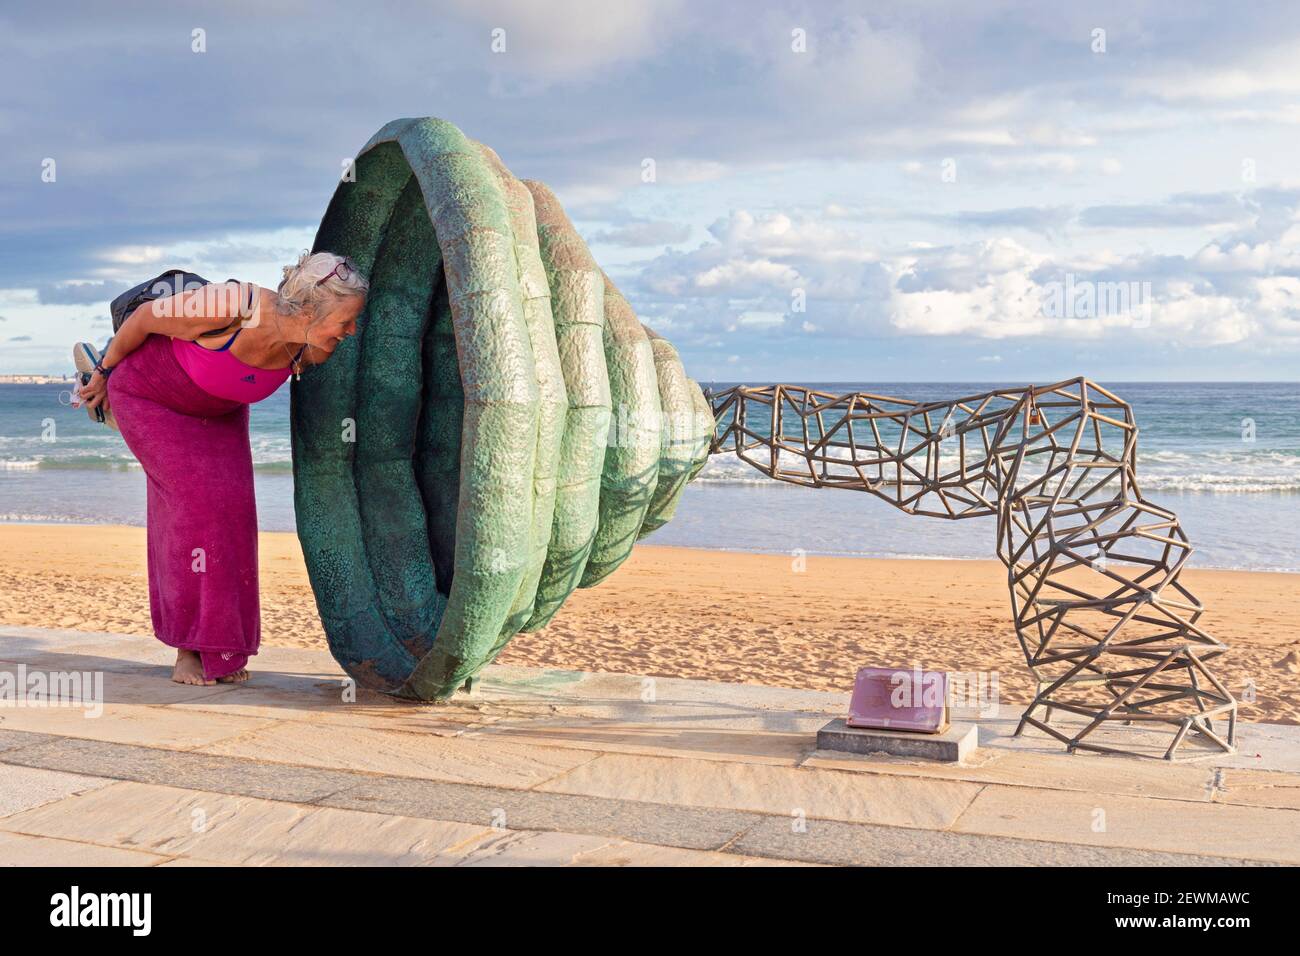 Europe, Spain, Gipuzkoa, Zarautz Beach with Sculpture shaped like a horn being investigated by a woman tourist. Stock Photo